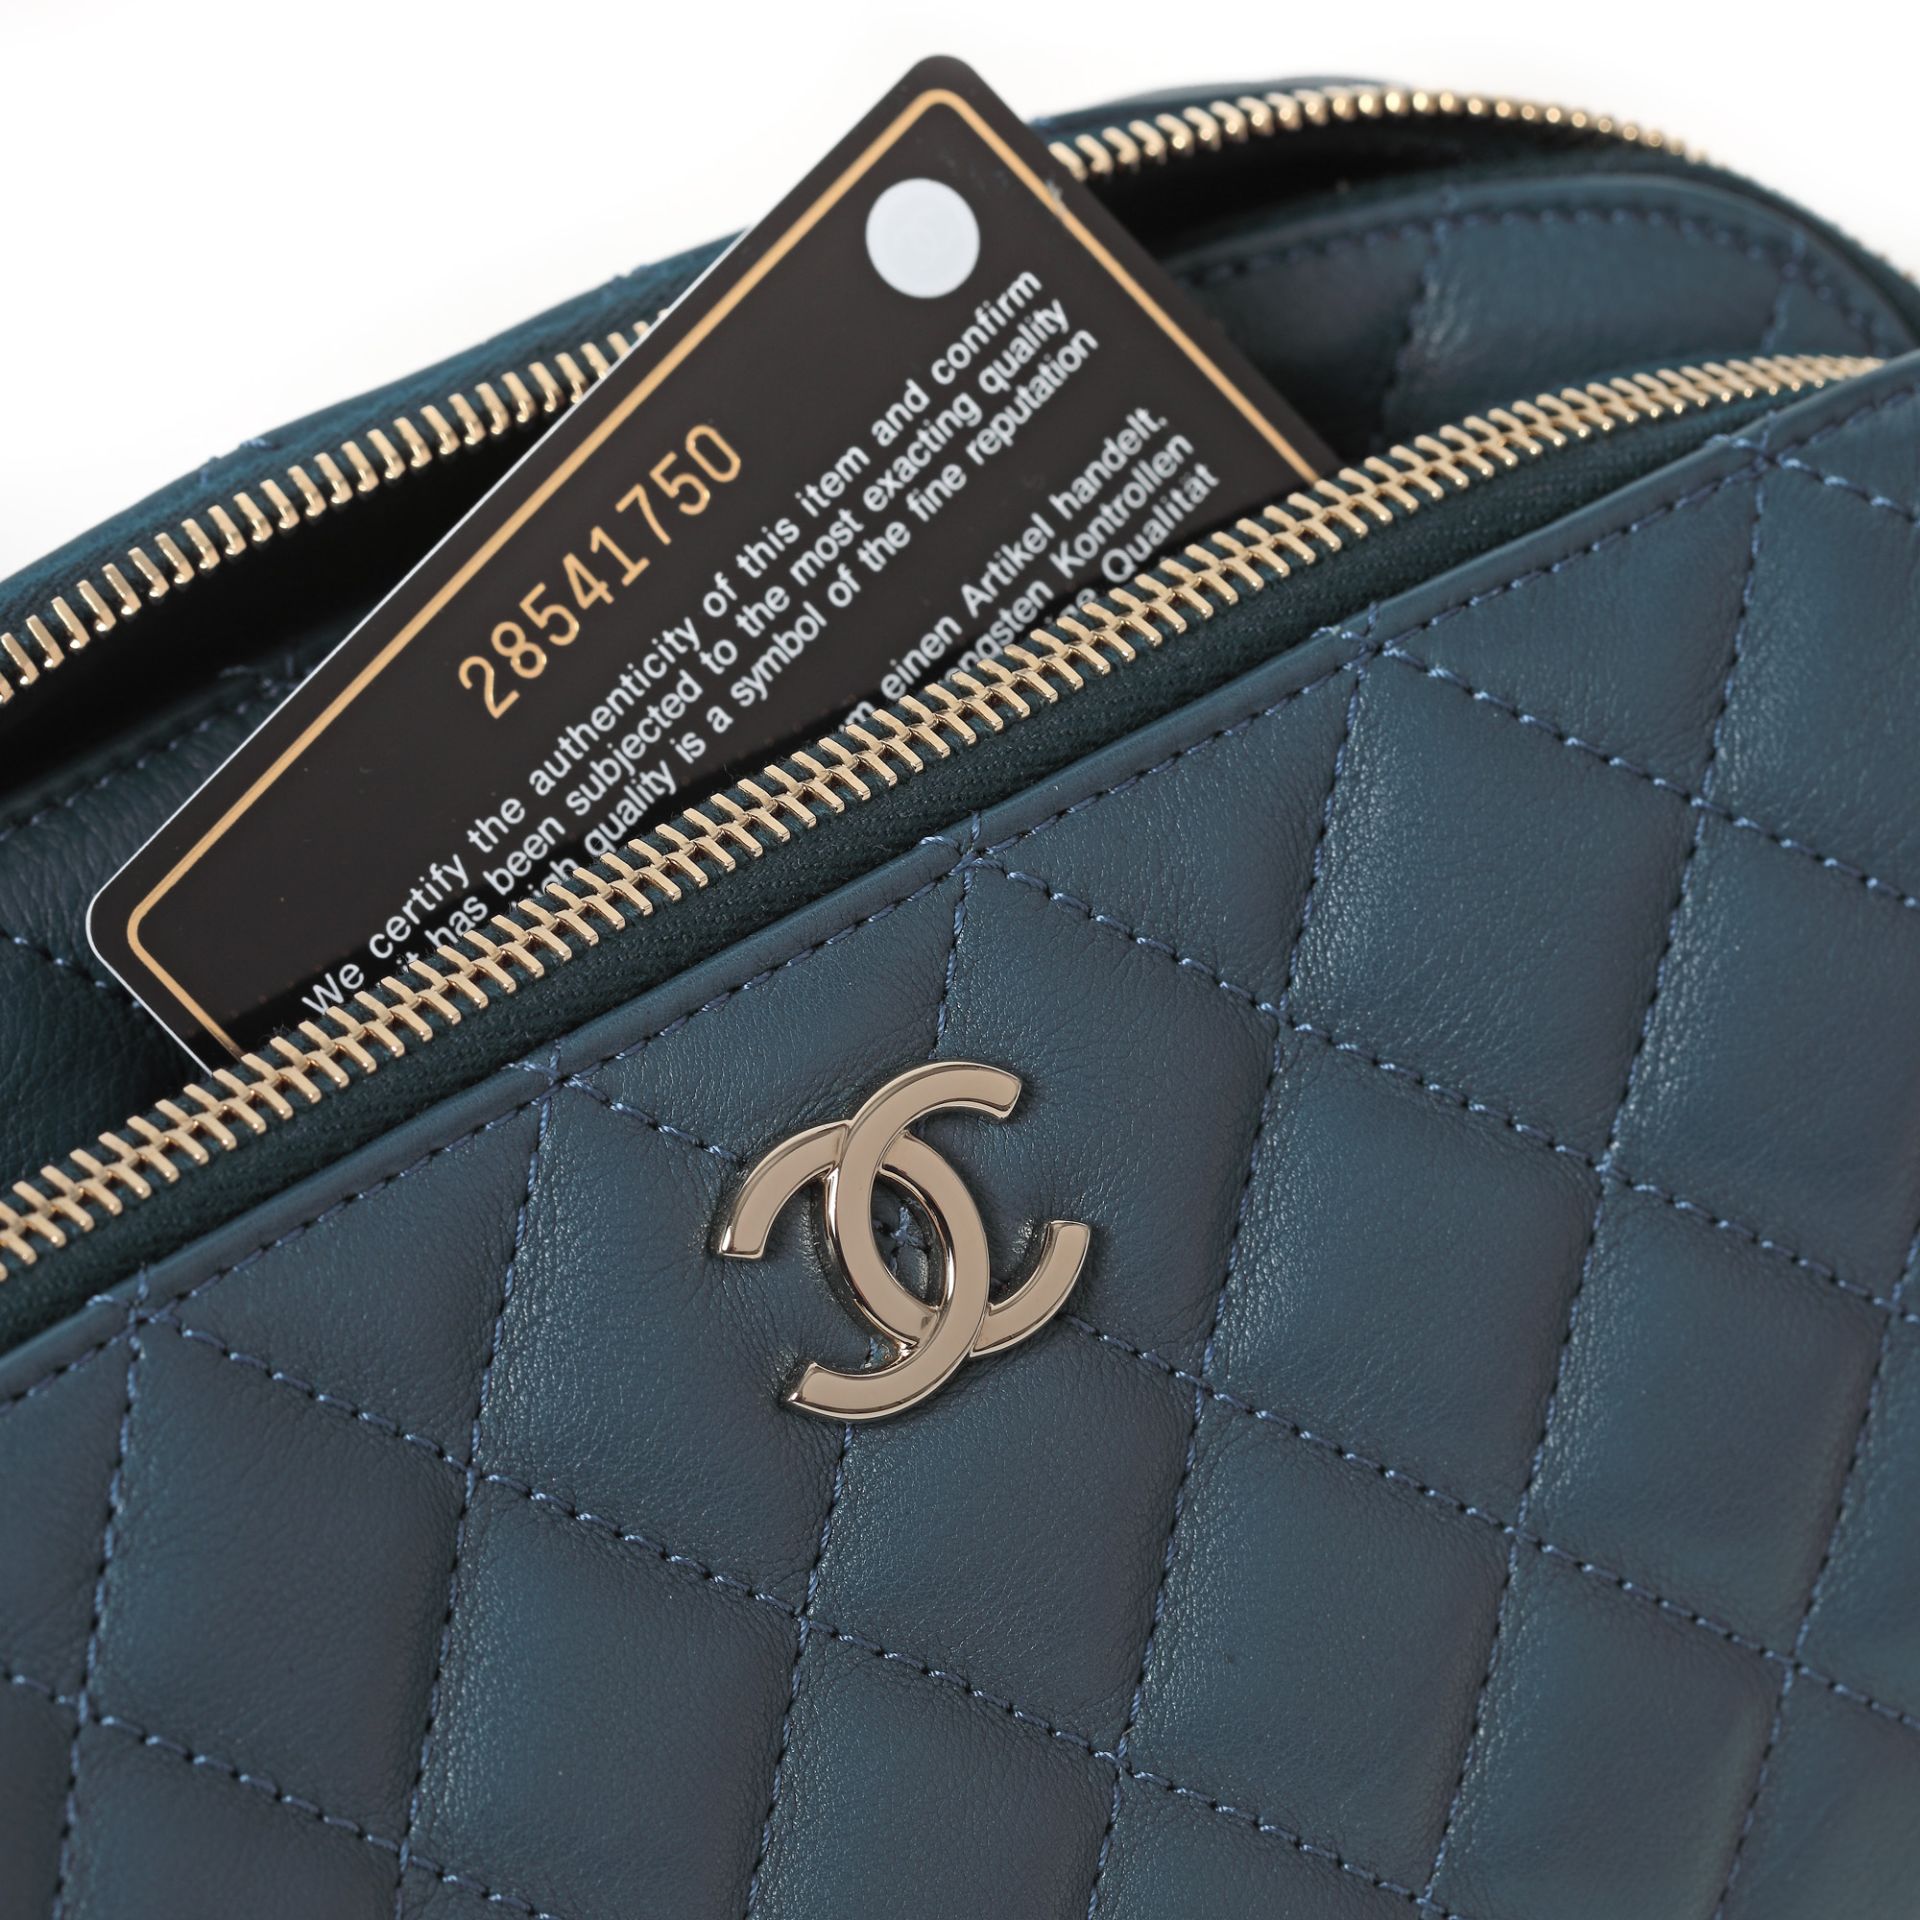 Chanel carrying case, quilted leather, blue - Image 4 of 5